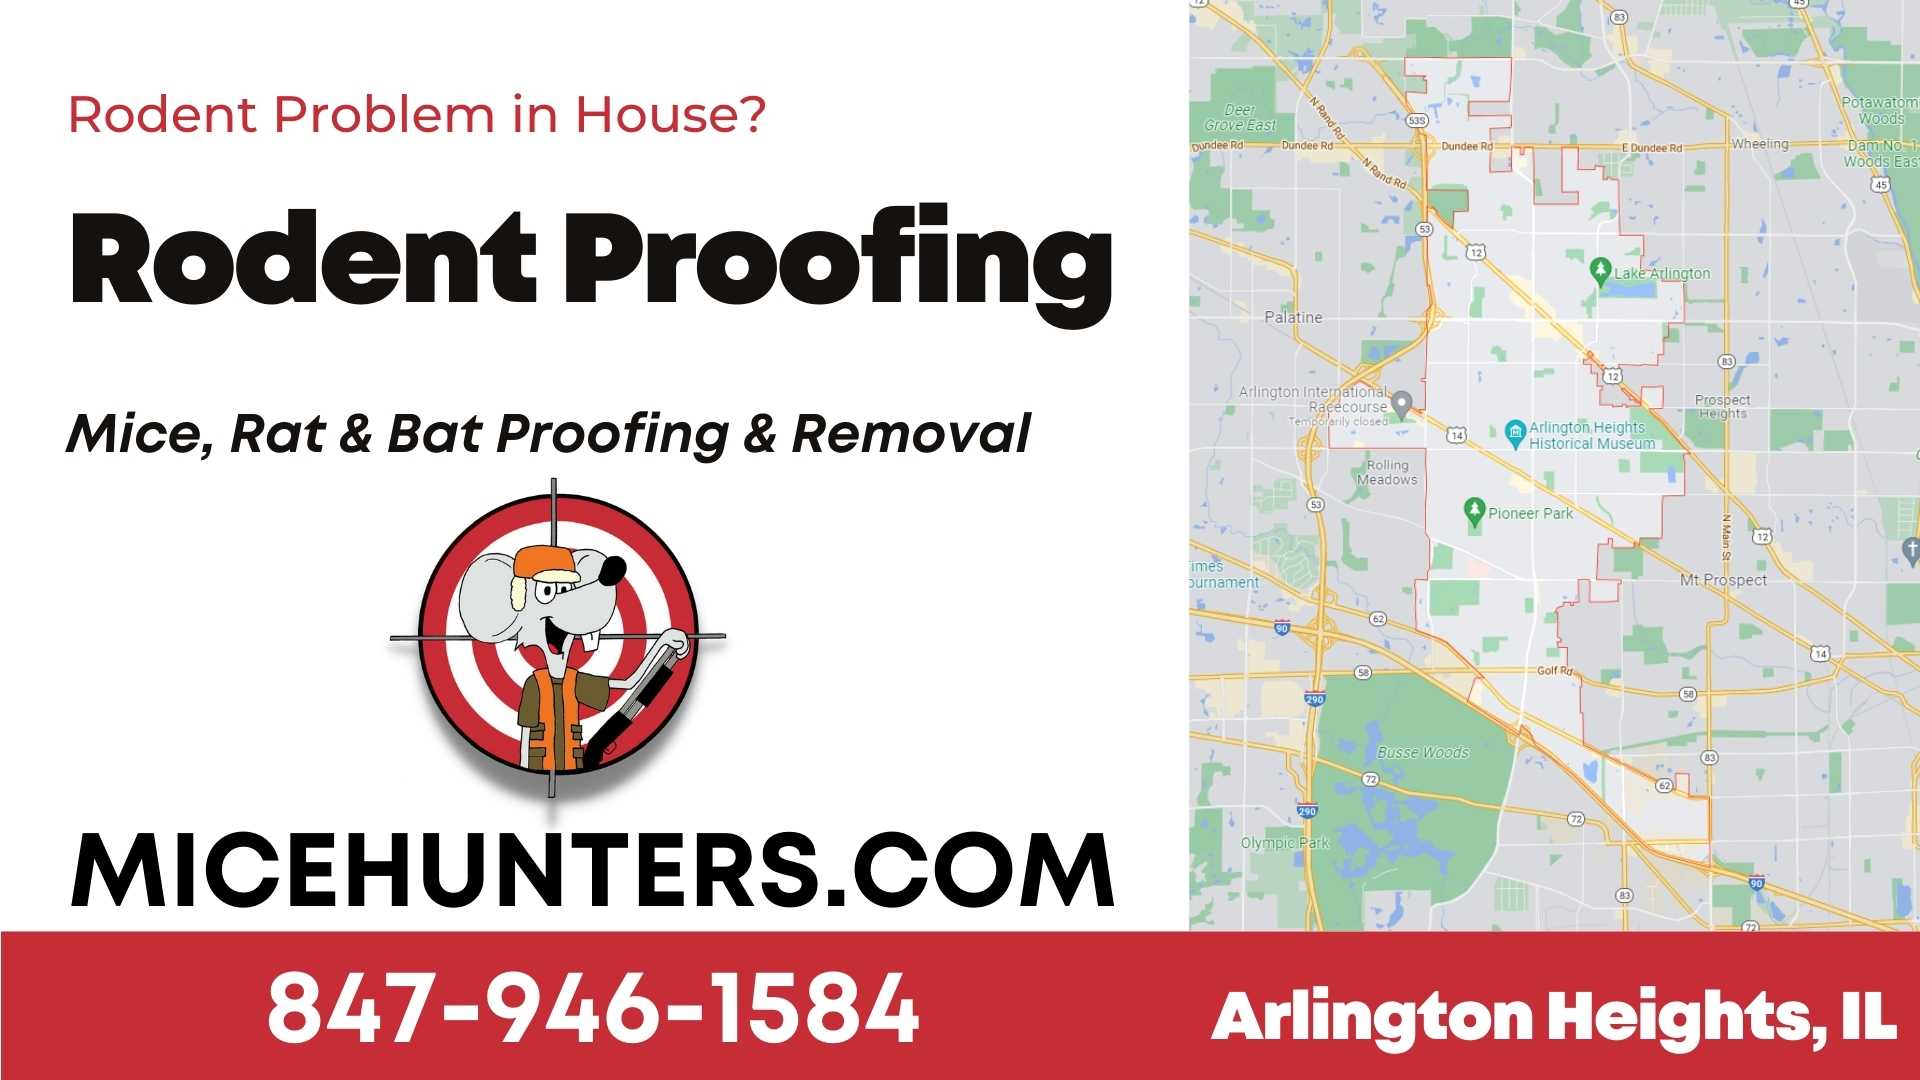 Arlington Heights Rodent and Mice Proofing Exterminator near me